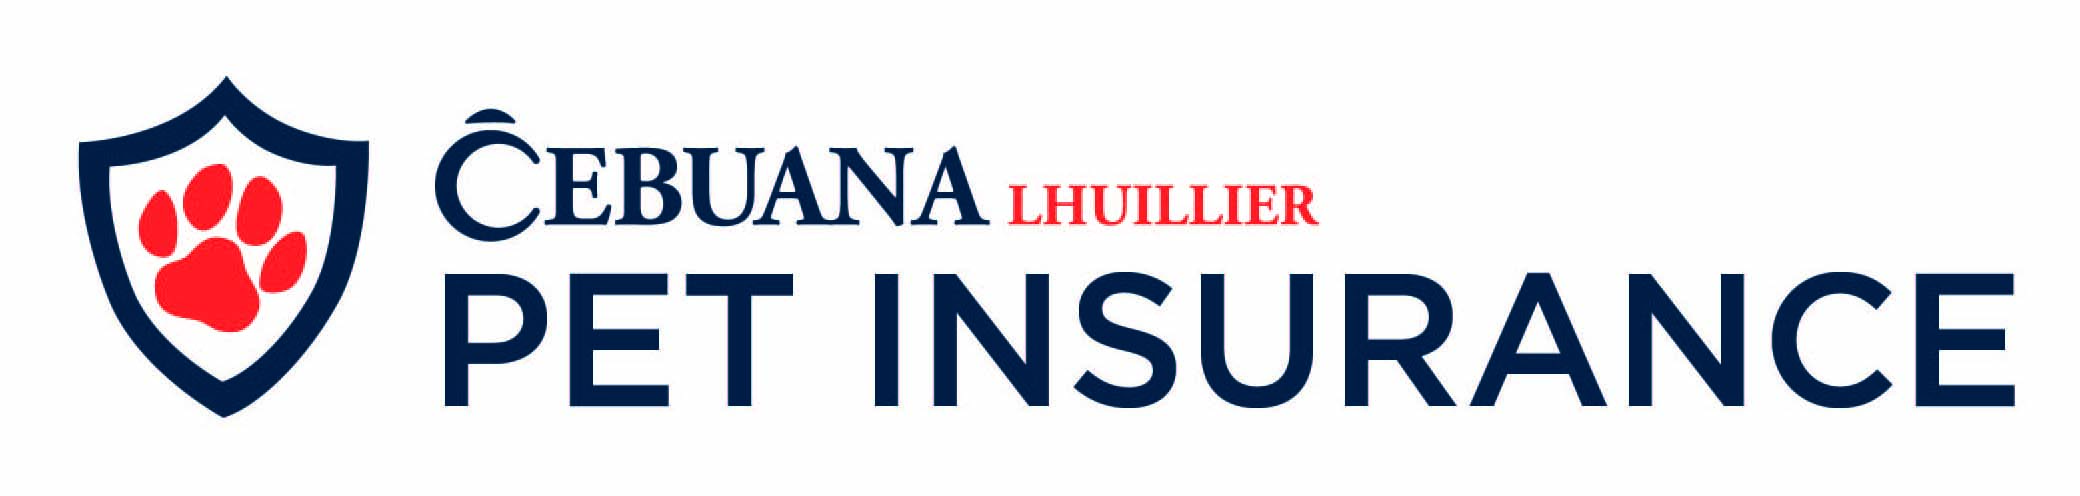 Pet Insurance is Individual Insurance specifically designed for Cebuana Lhuillier’s client’s dogs. It covers Medical Reimbursement, Owner’s Liability, Burial Assistance (Euthanasia) and Personal Accident for the Pet Owner. Pet Insurance is underwritten by Malayan Insurance.